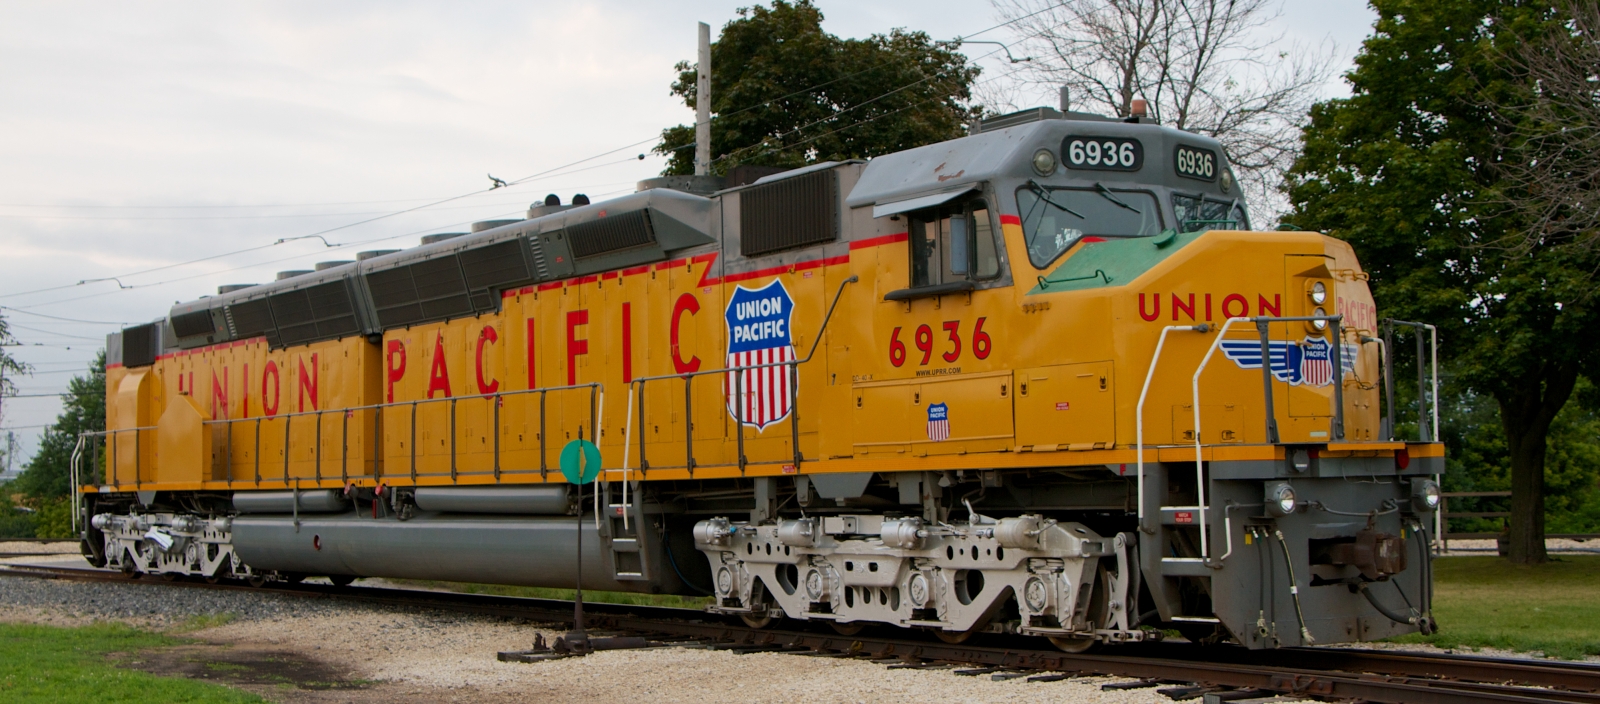 DDA40X No. 6936 was preserved operational and is seen here in Union, Illinois in 2013